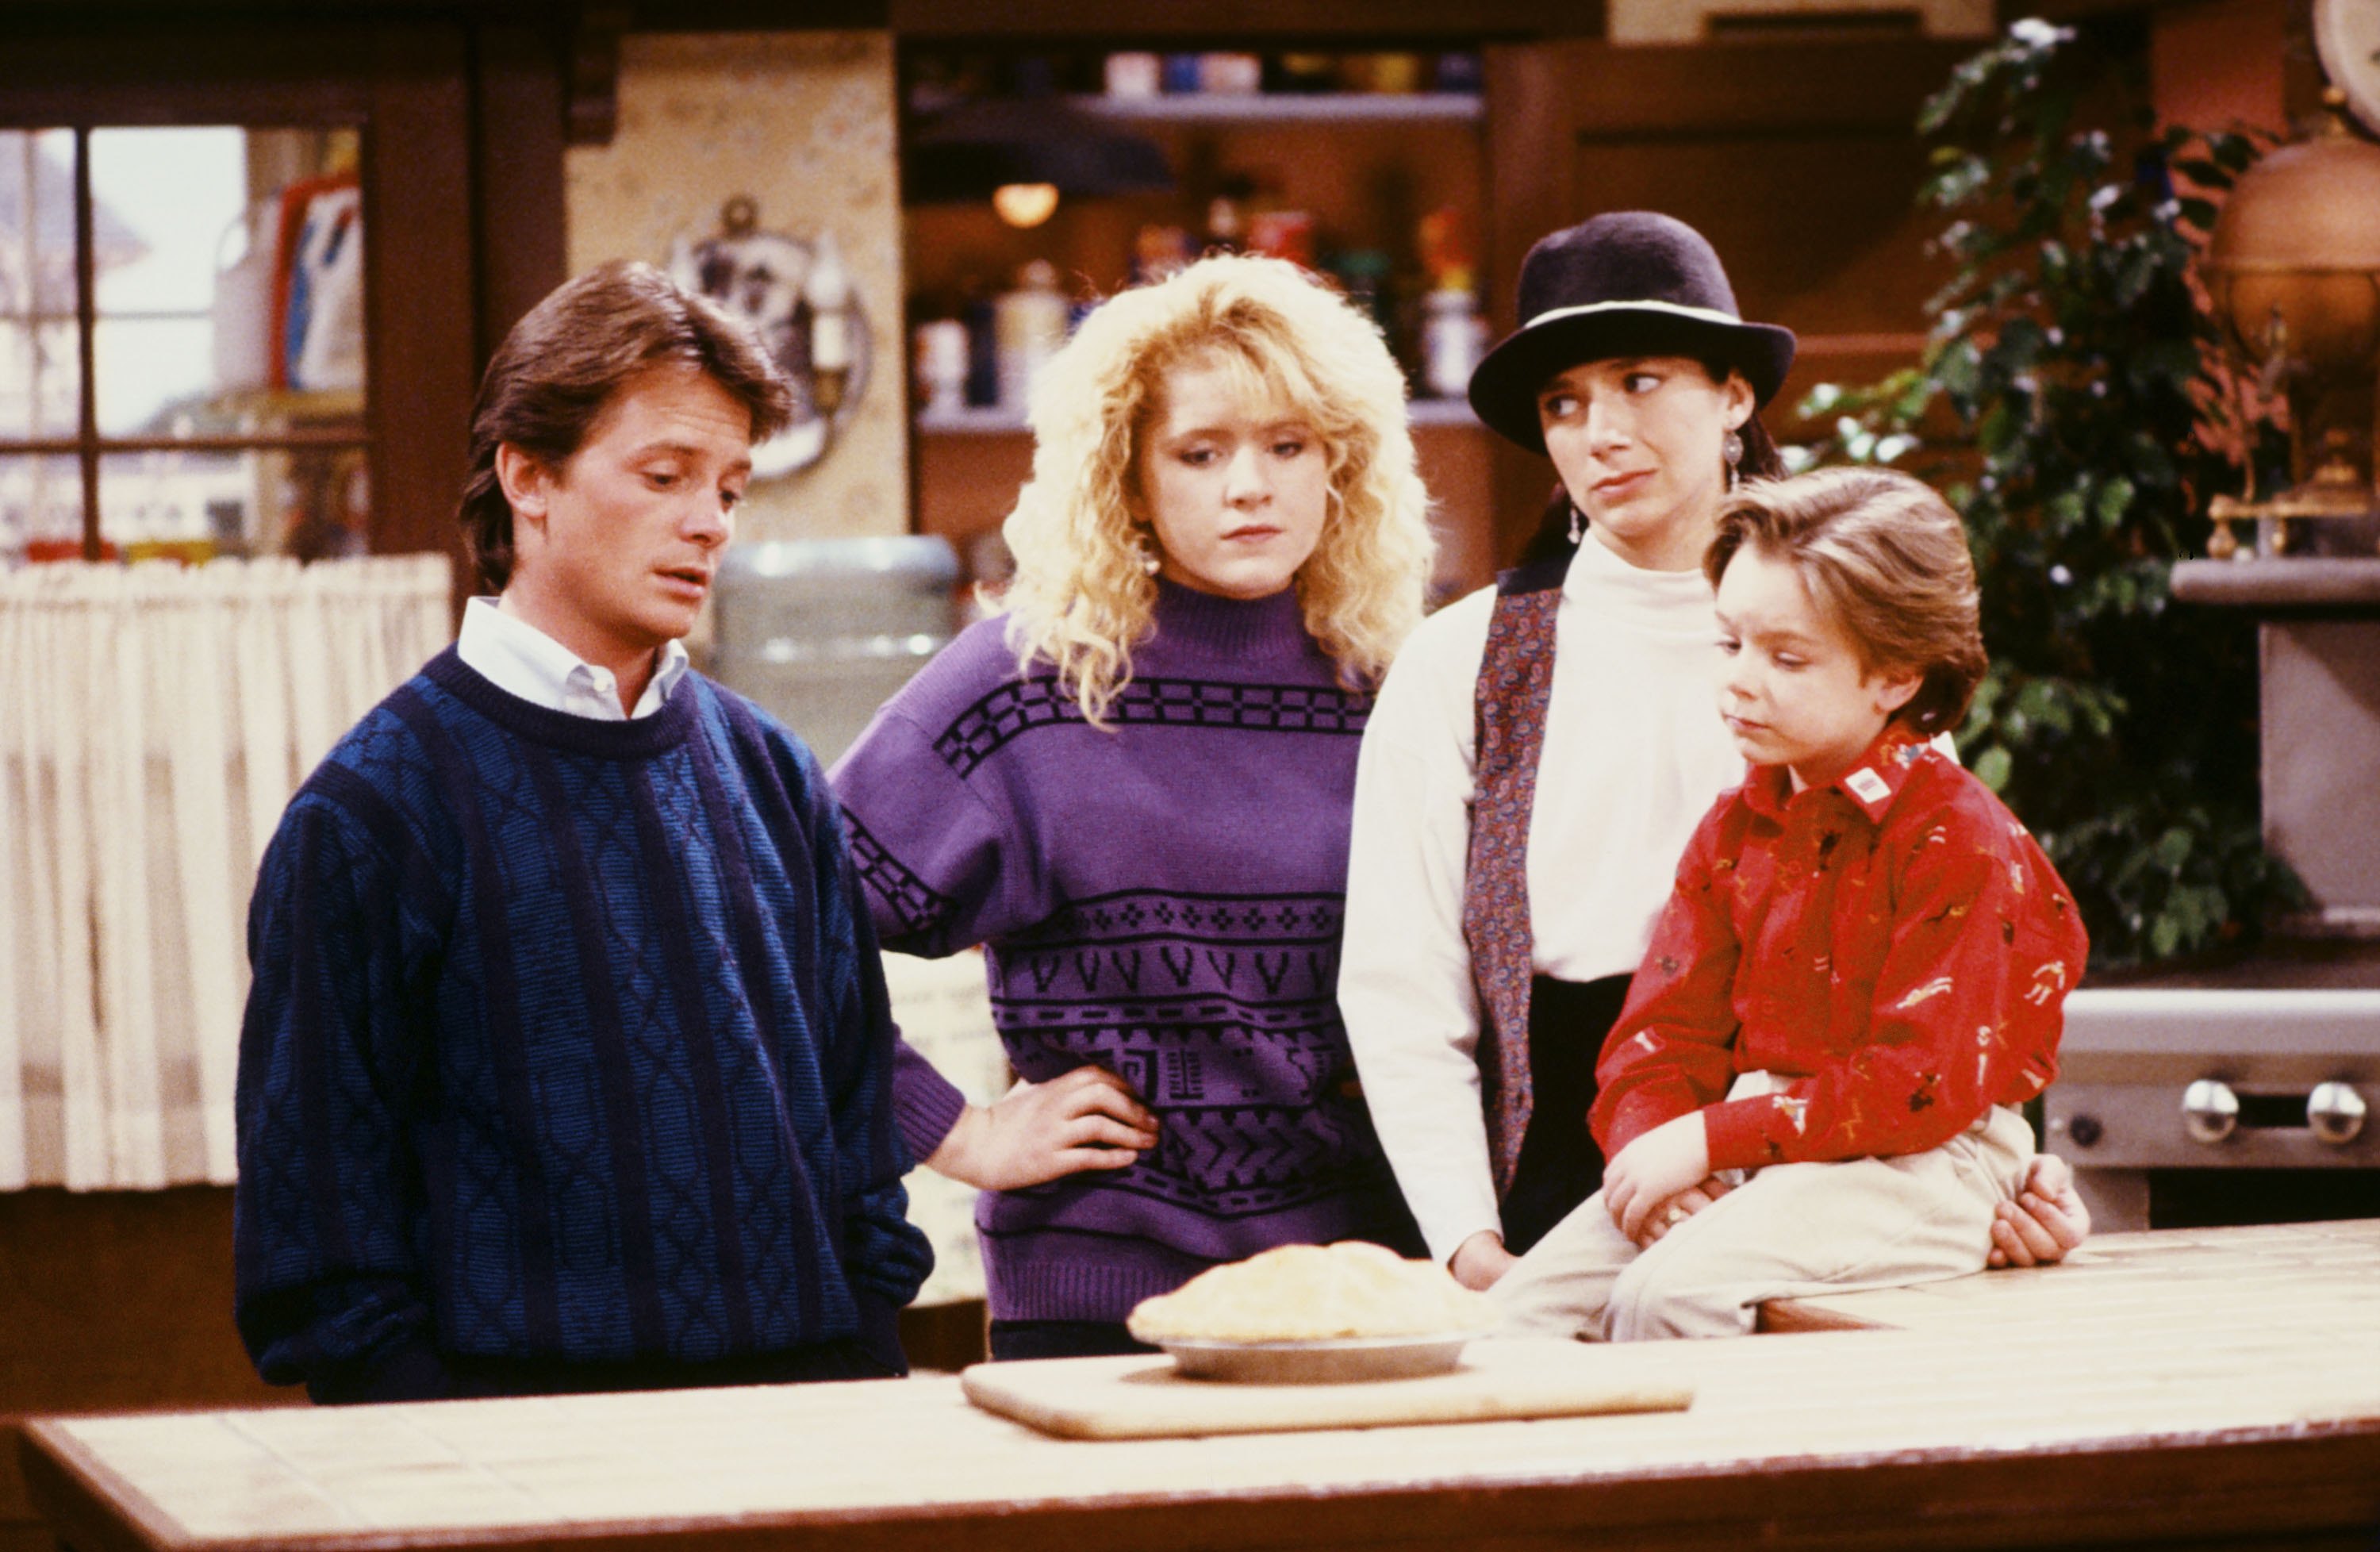 From (L-R) Michael J. Fox, Tina Yothers, Justine Bateman, and Brian Bonsall on the set of "Family Ties" | Source: Getty Images